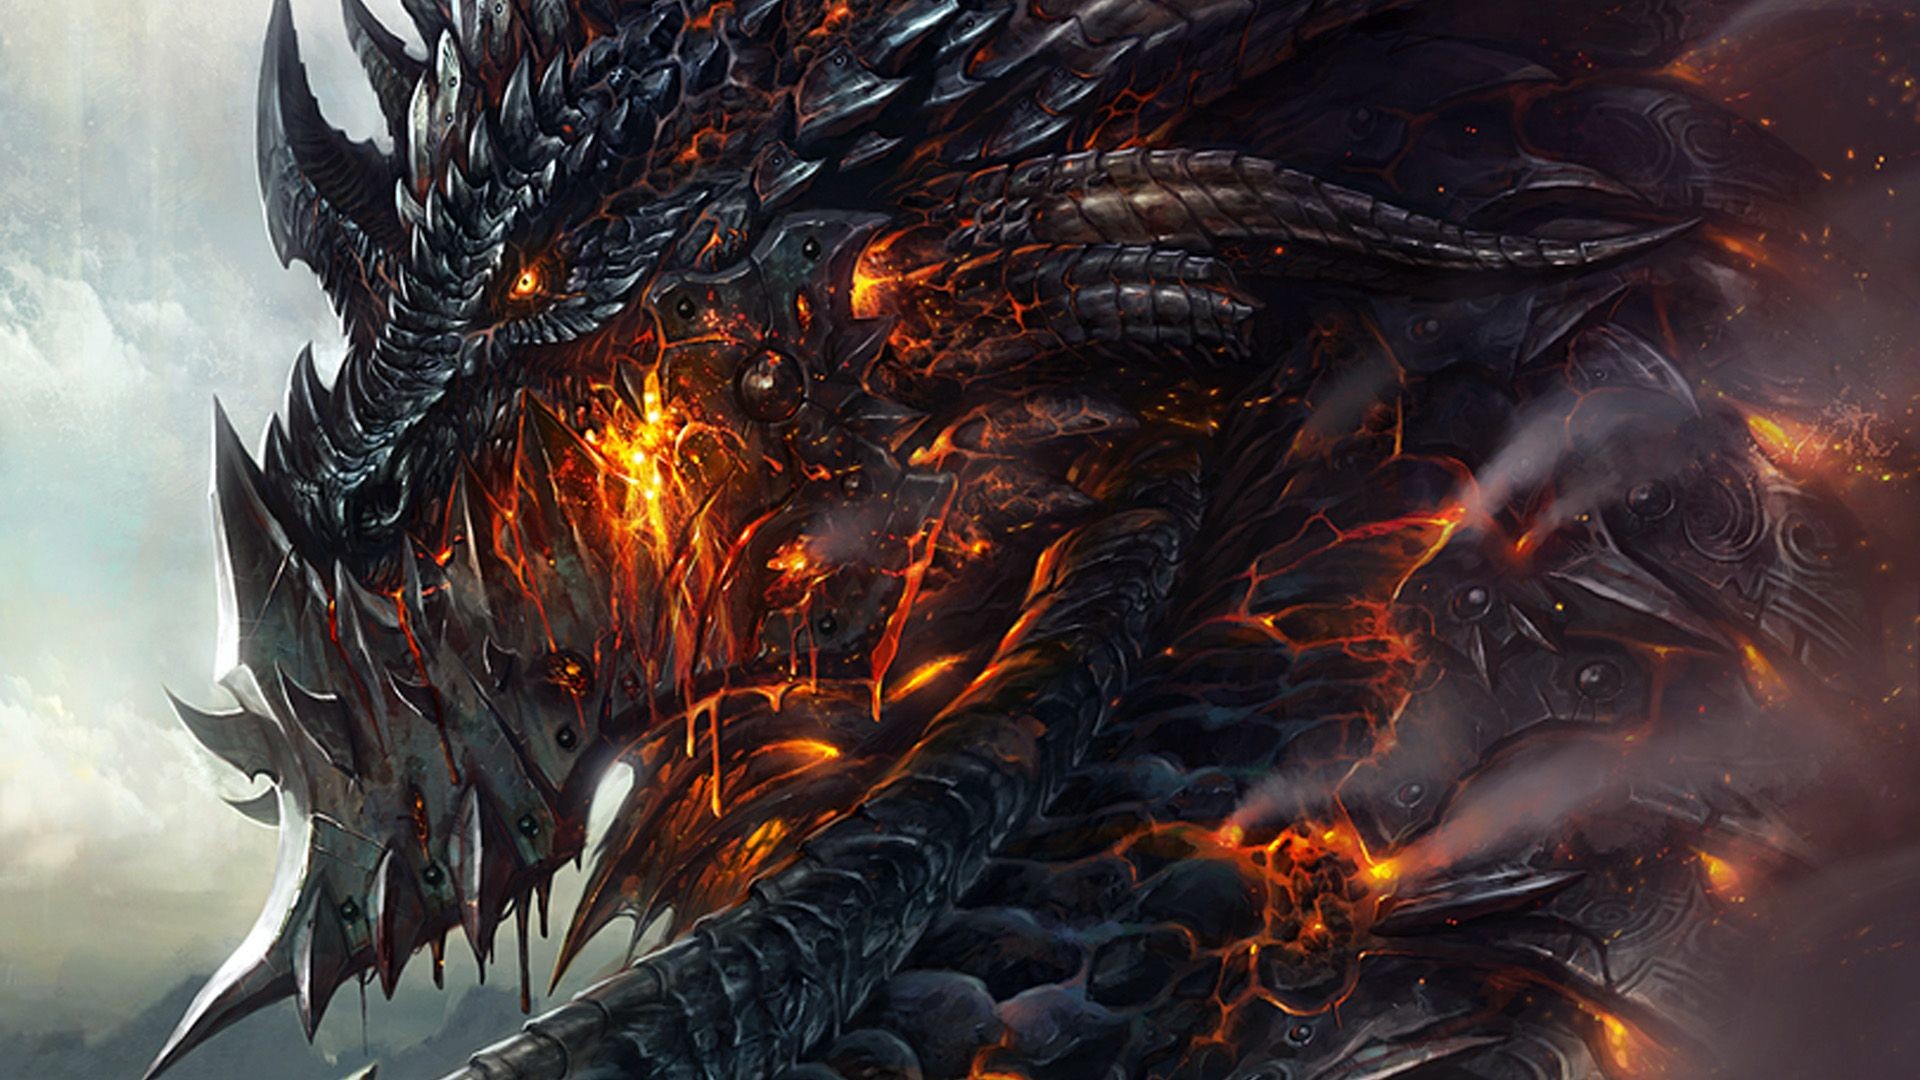 1920x1080 World Of Warcraft - Deathwing Full HD Wallpaper and Background .